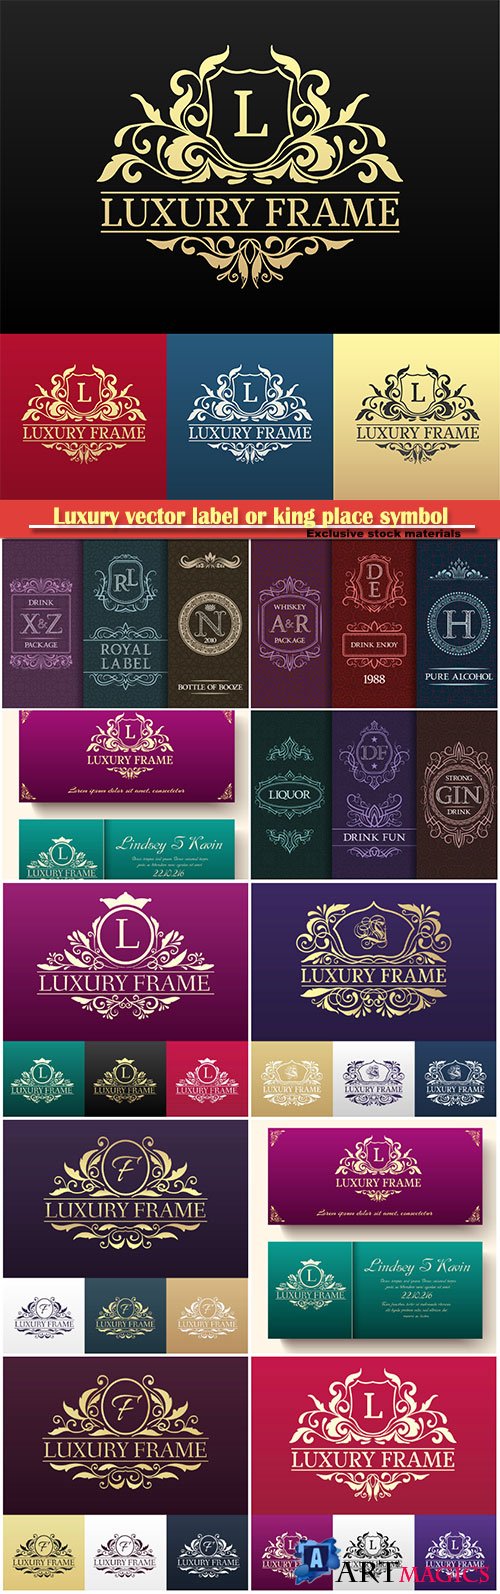 Luxury vector label or king place symbol element with decorative calligraphy object set